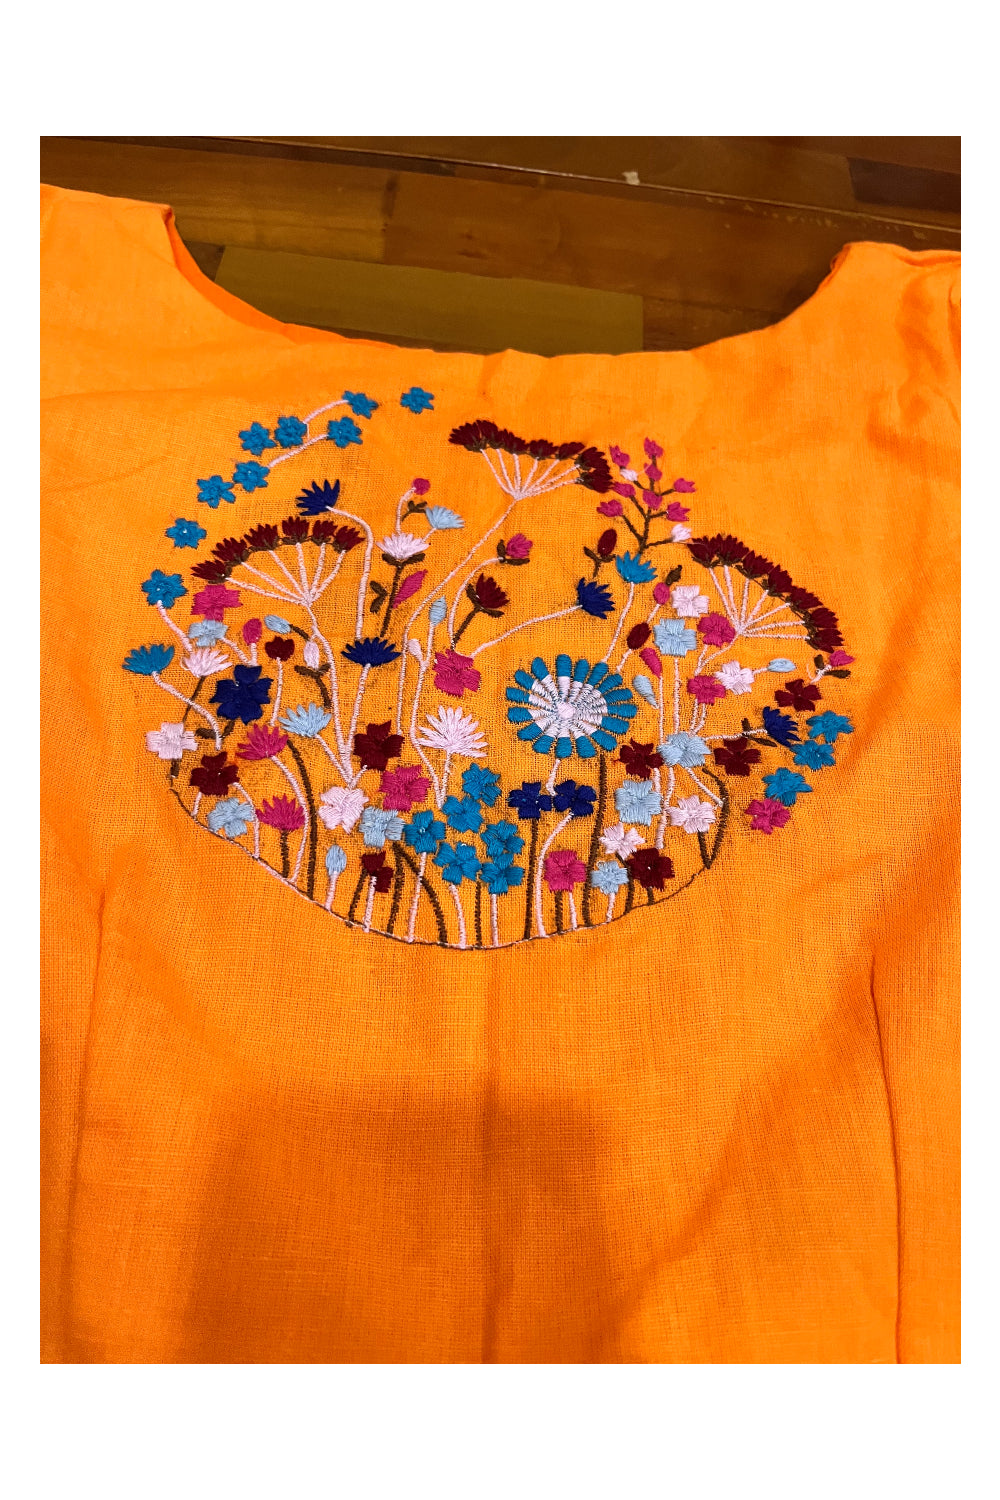 Southloom Orange Ready Made Blouse With Hand Embroidery Works